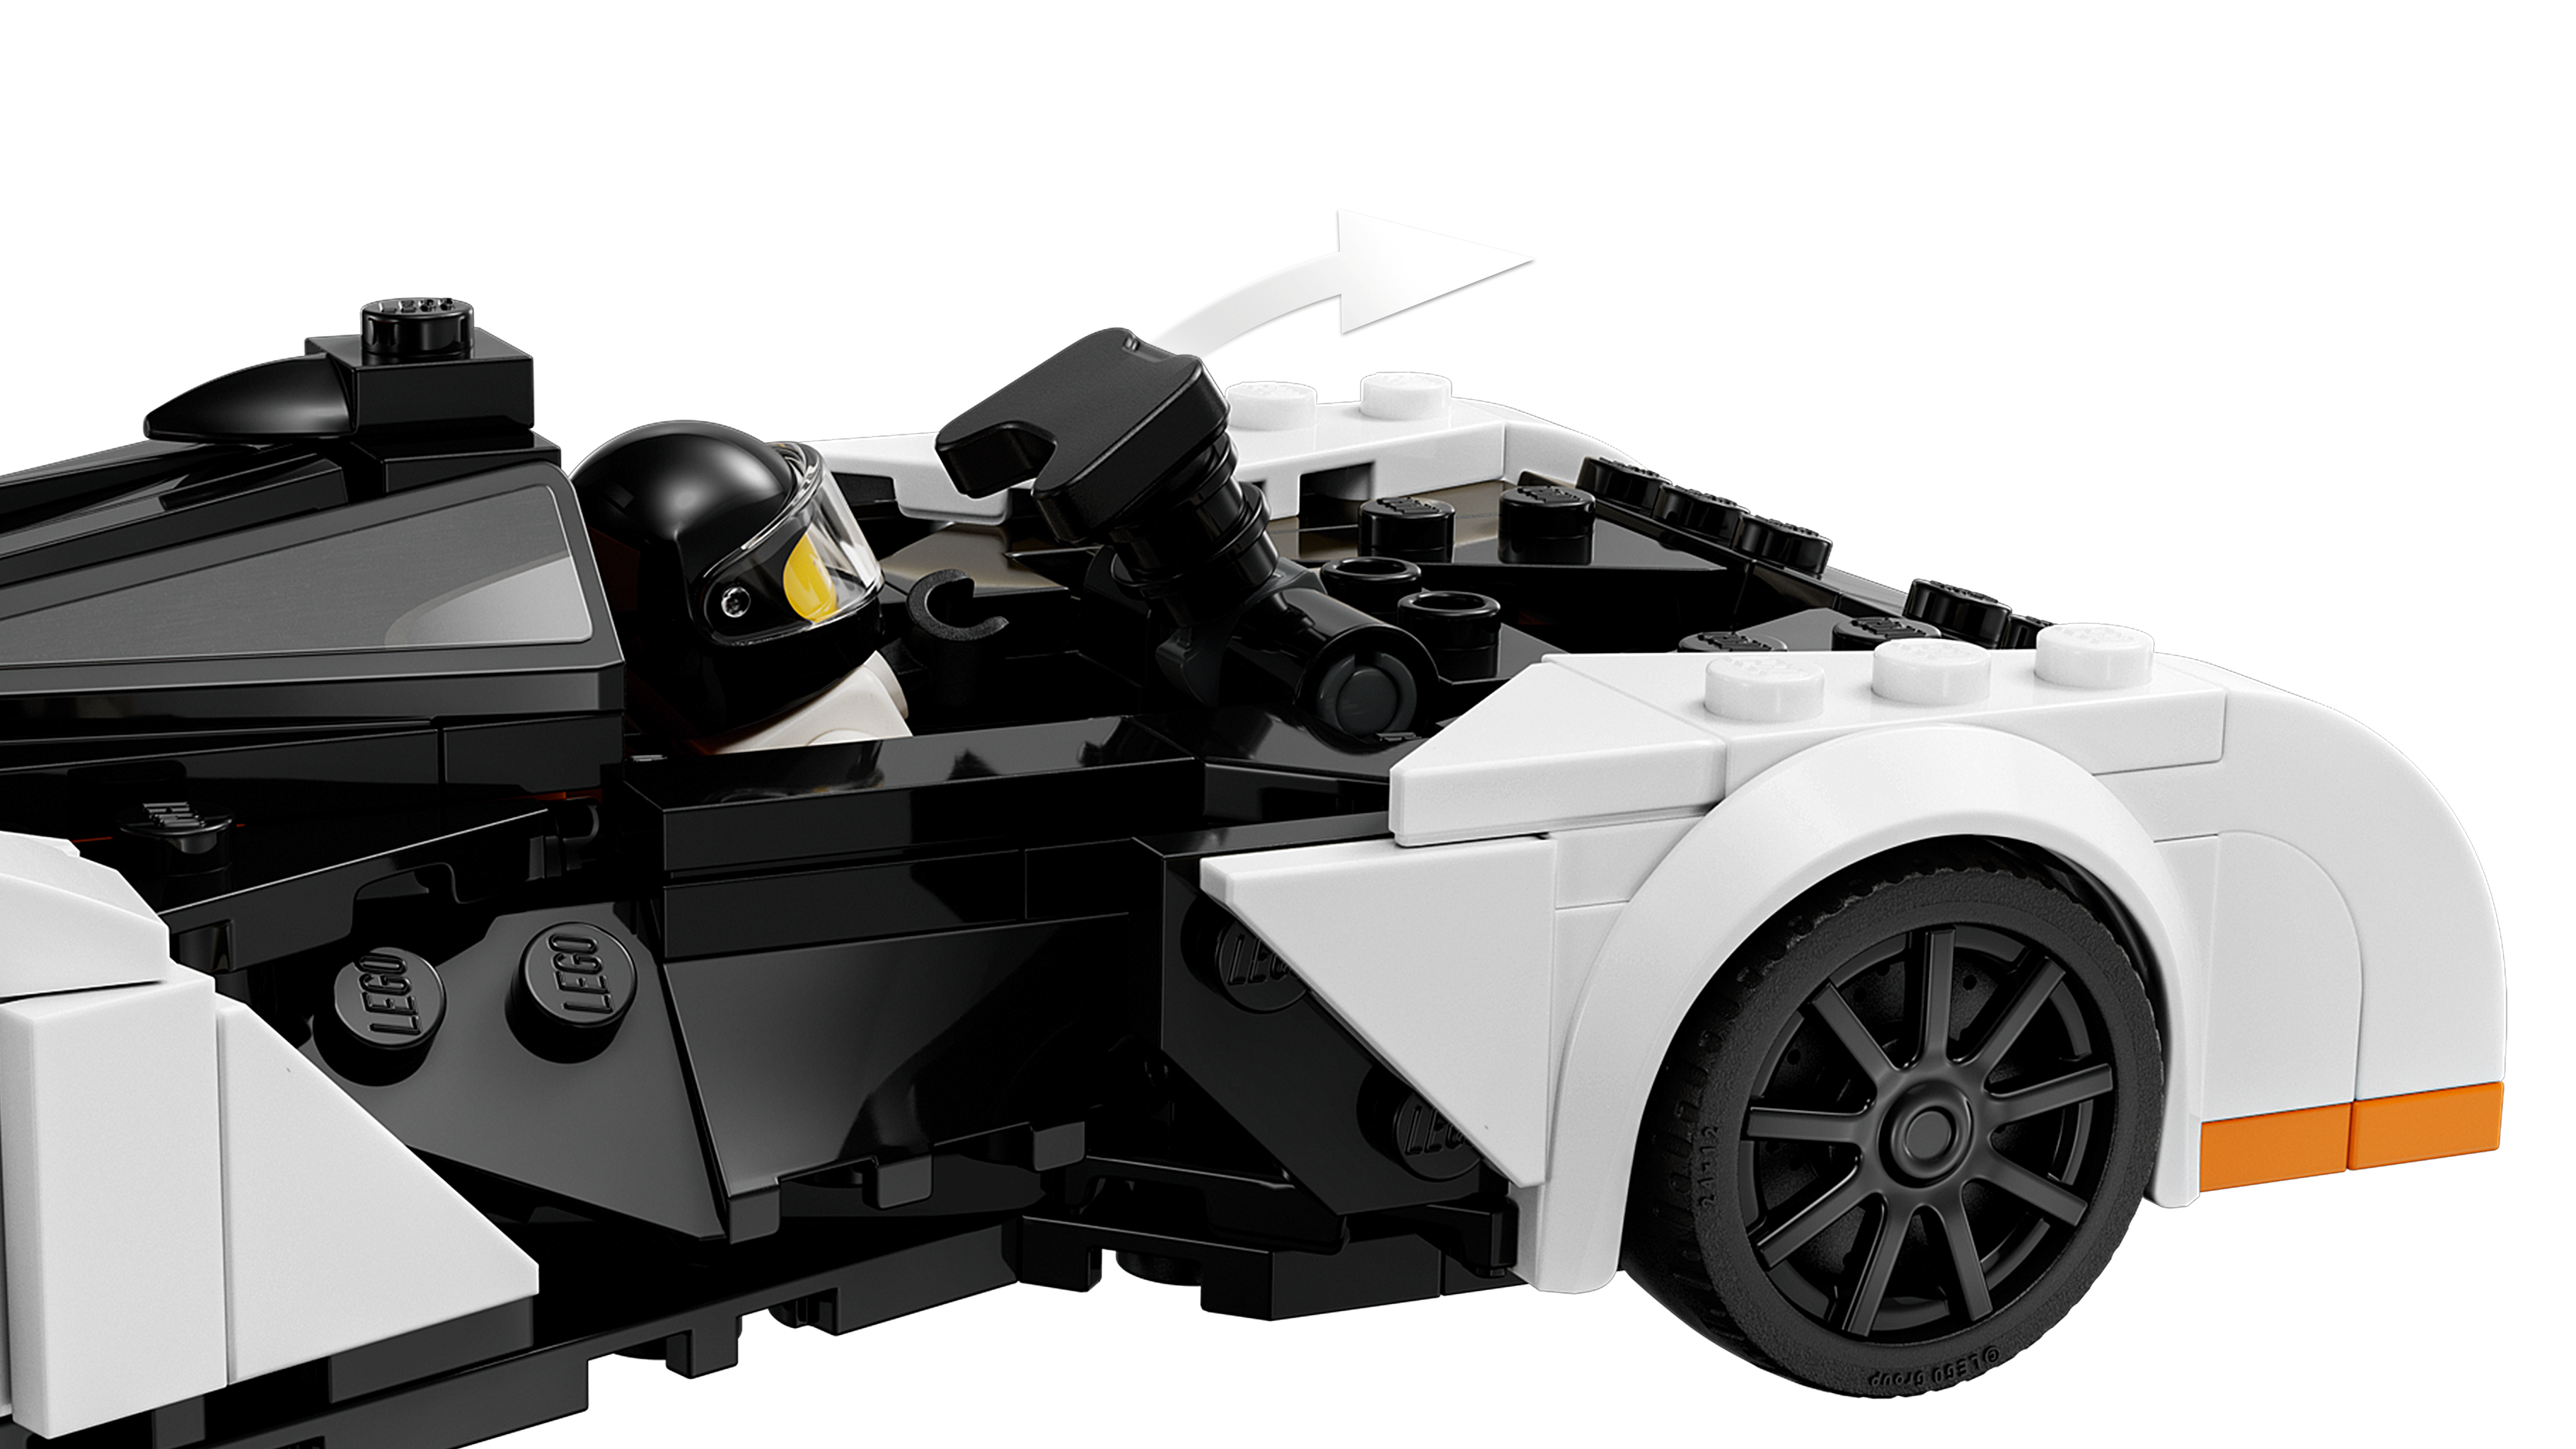 McLaren F1 LM, Solus GT Debut As Lego Kits, Video Visits Toymaker's HQ